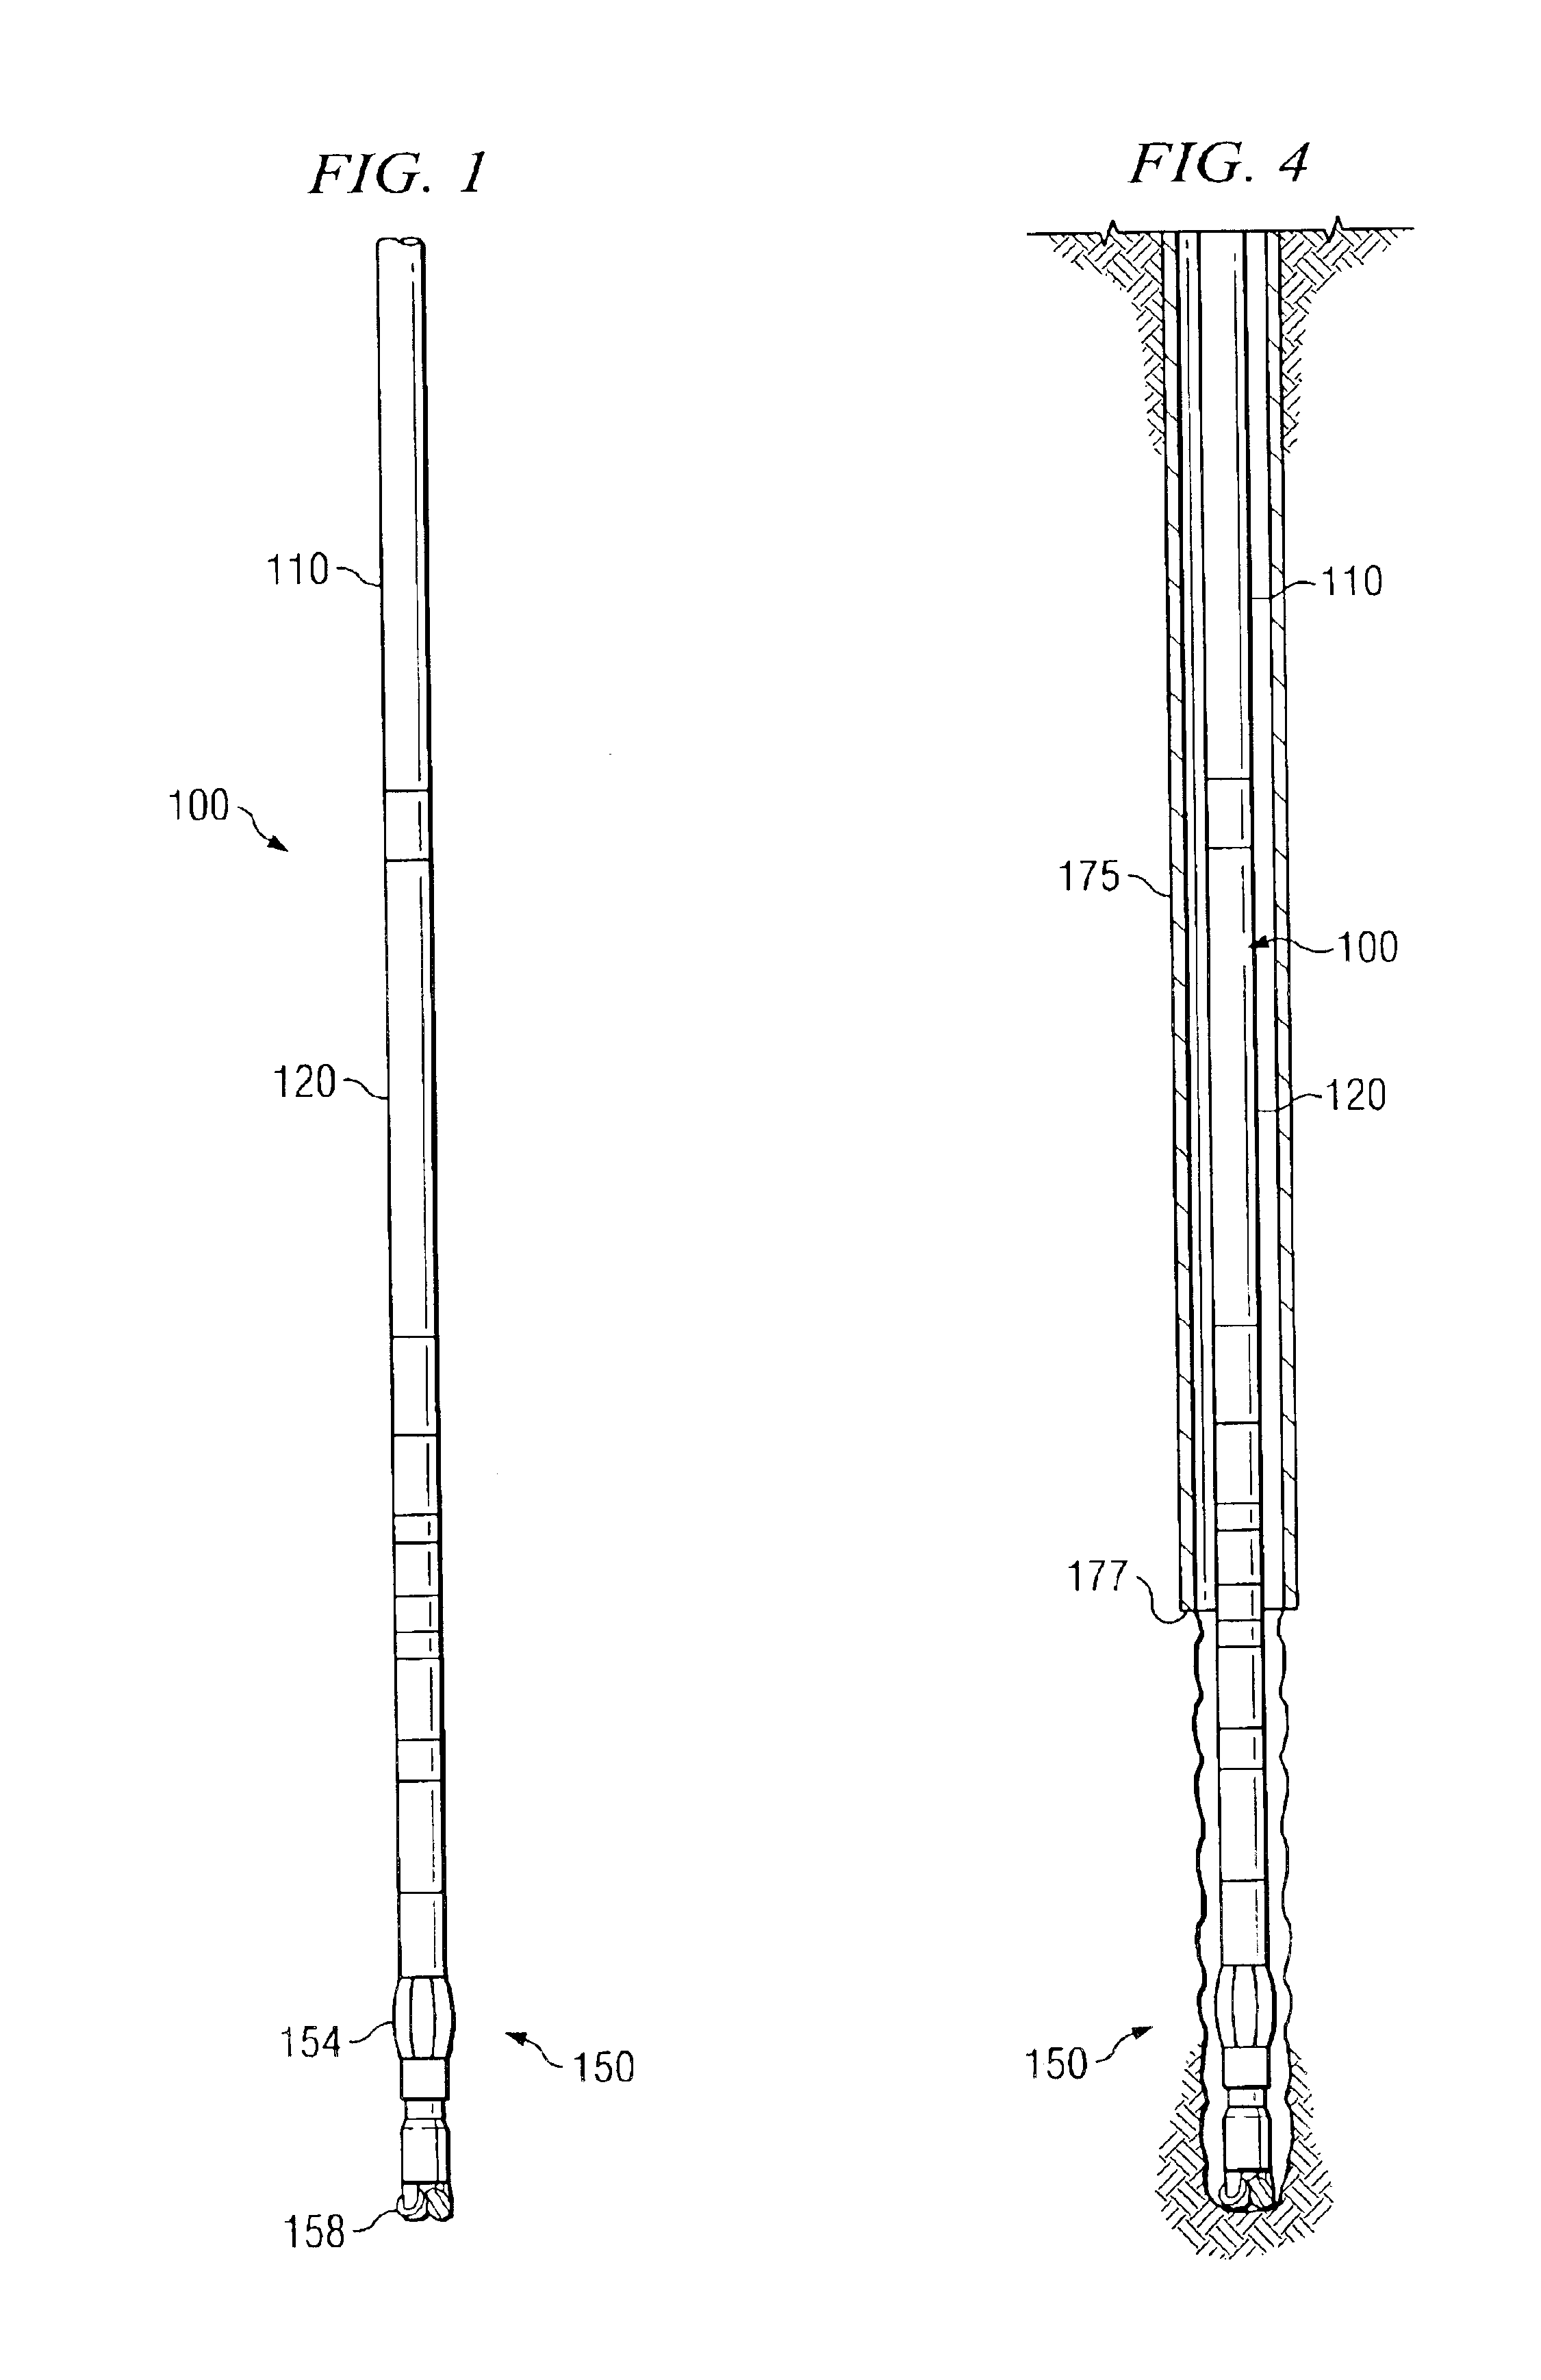 Downhole referencing techniques in borehole surveying